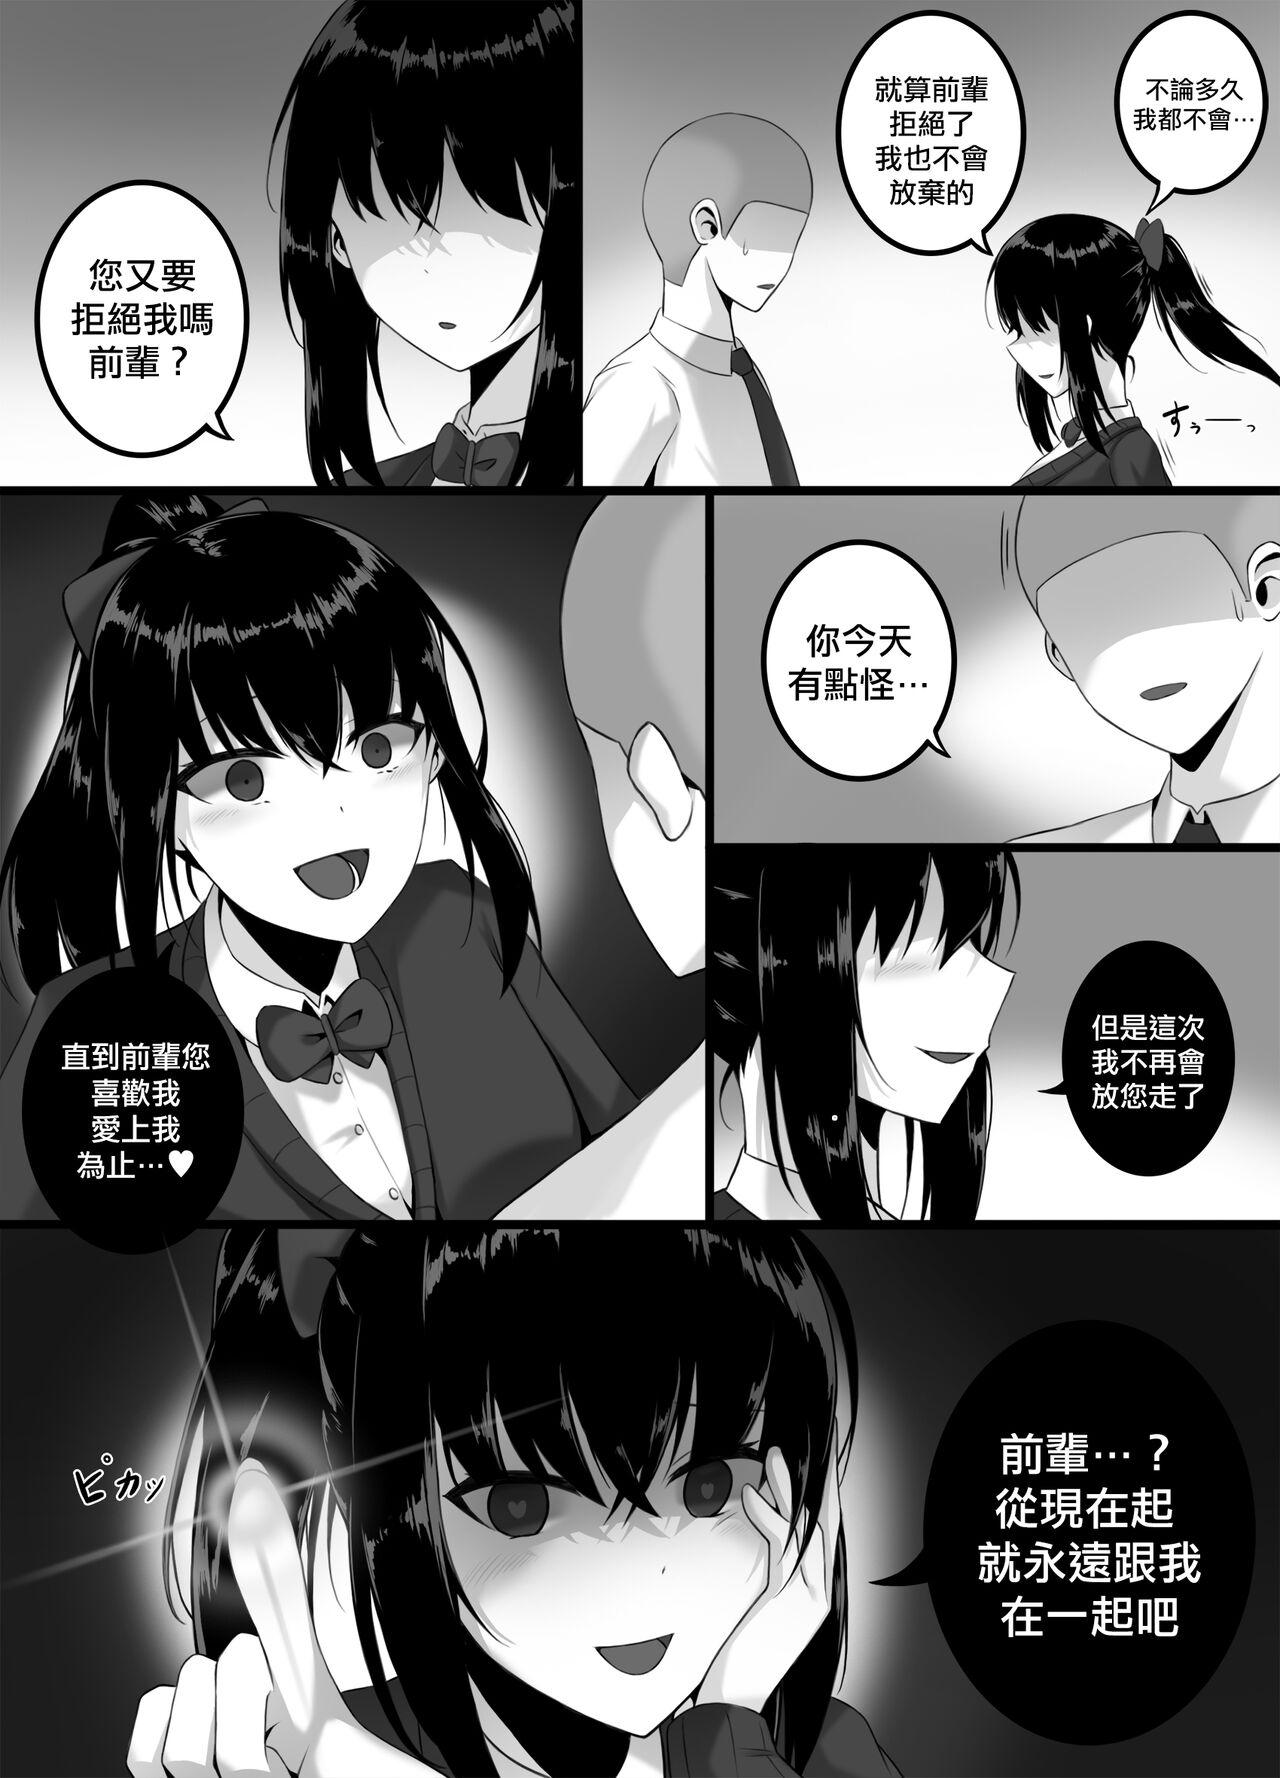 Mature Yandere girl Thailand - Page 3